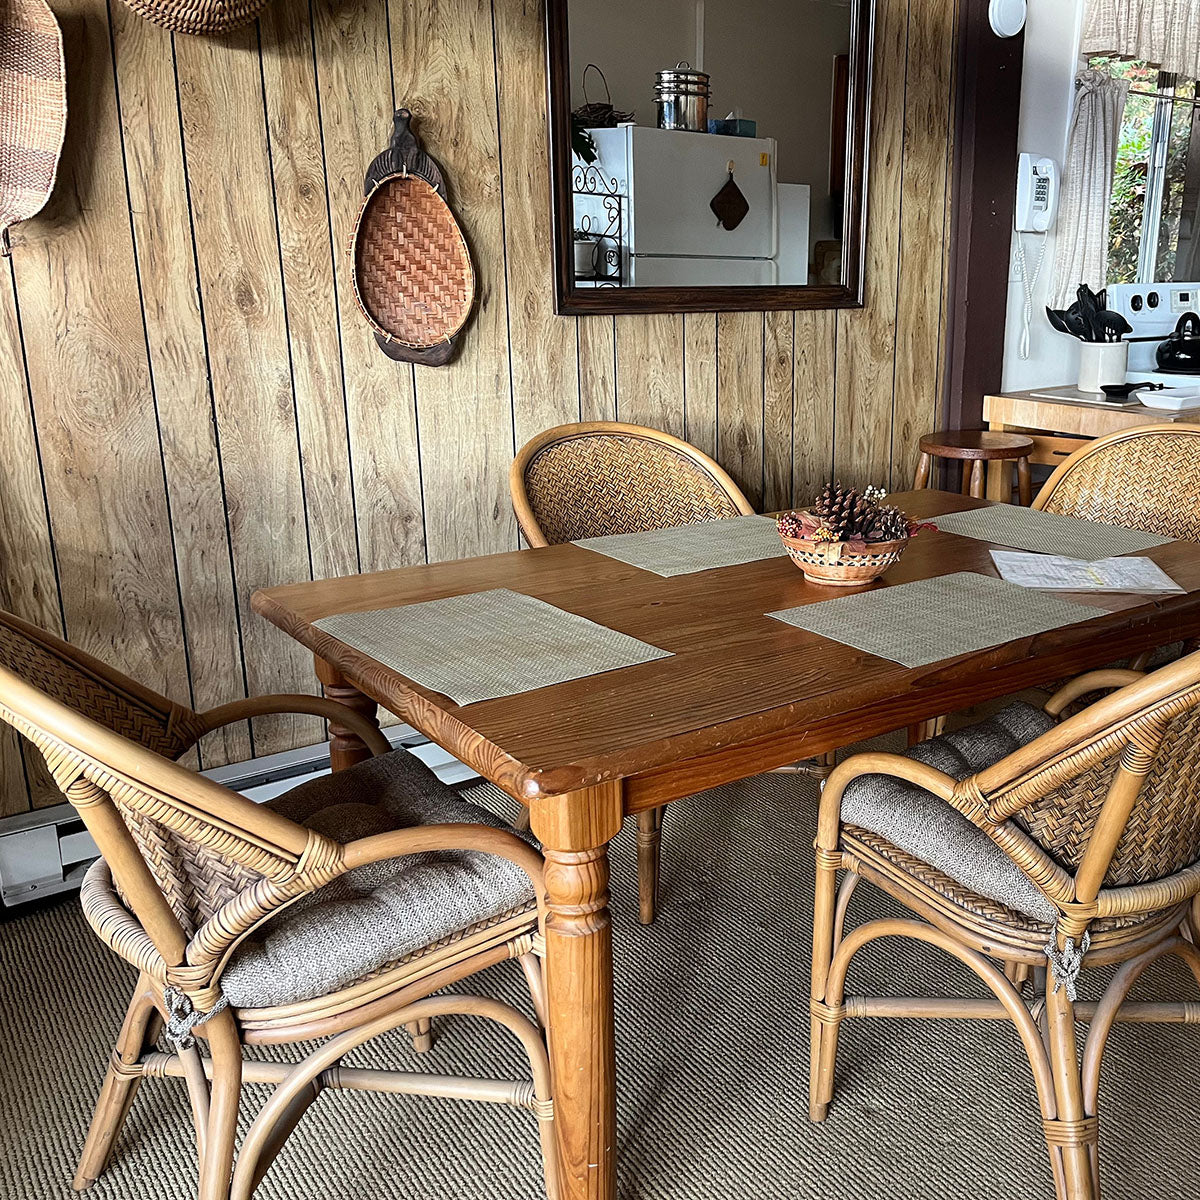 neutral colored dining chair pads on rattan chairs in rustic dining room with sisal rug and woven baskets